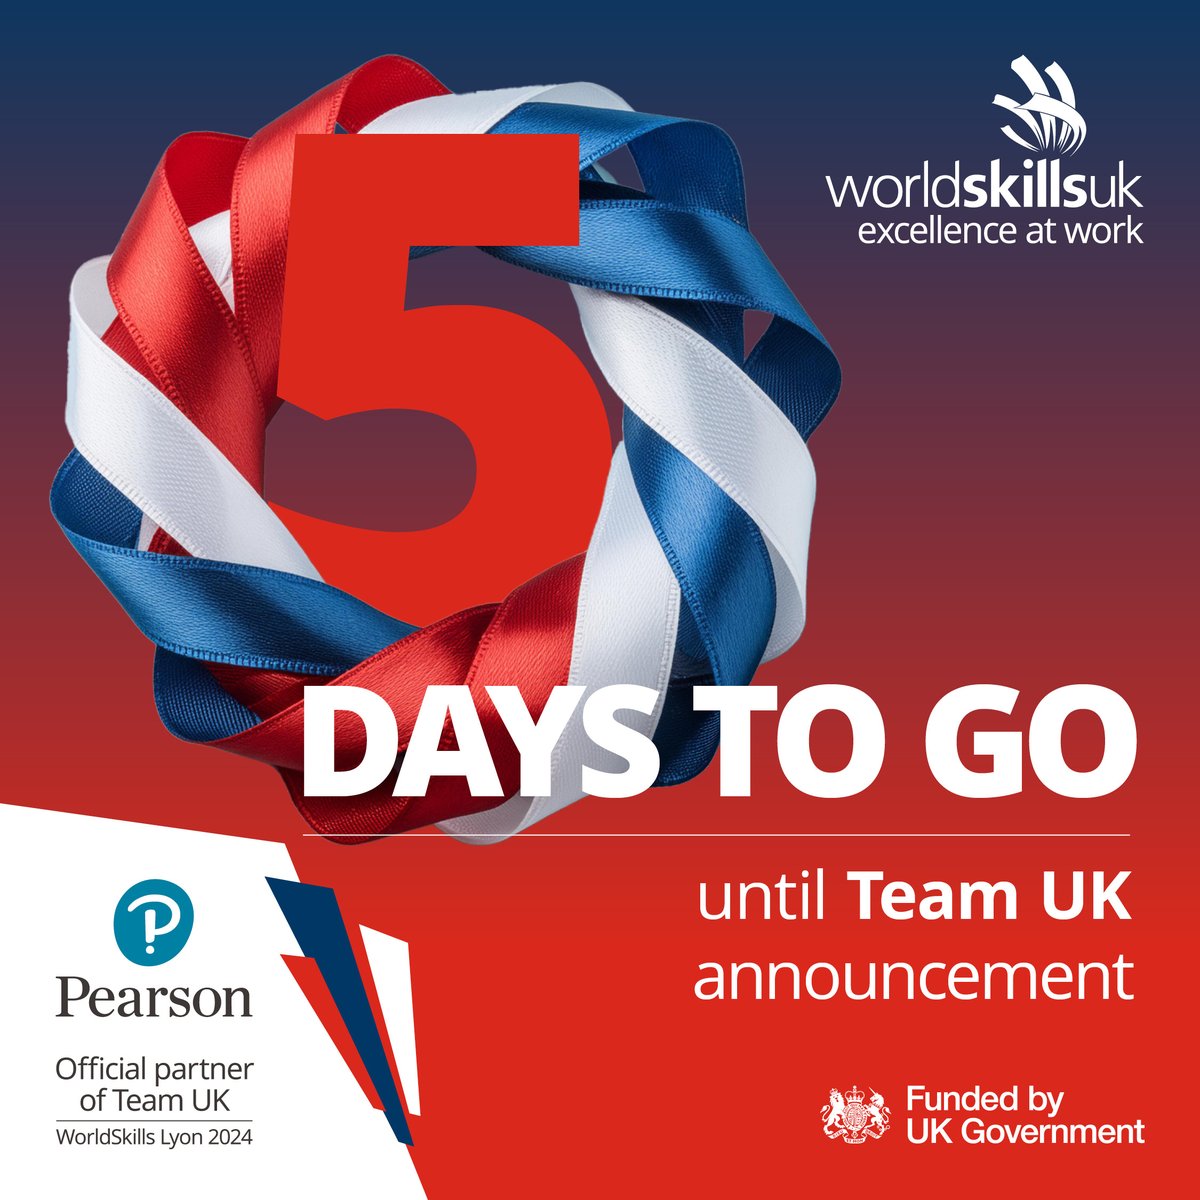 After months of hard work and dedication from Squad UK, it is only 5 days until the announcement of Team UK! We are excited to share who will be heading to Lyon to compete in the 2024 WorldSkills. #TeamUK, powered by @worldskillsuk in partnership with @PearsonBTECAppr.